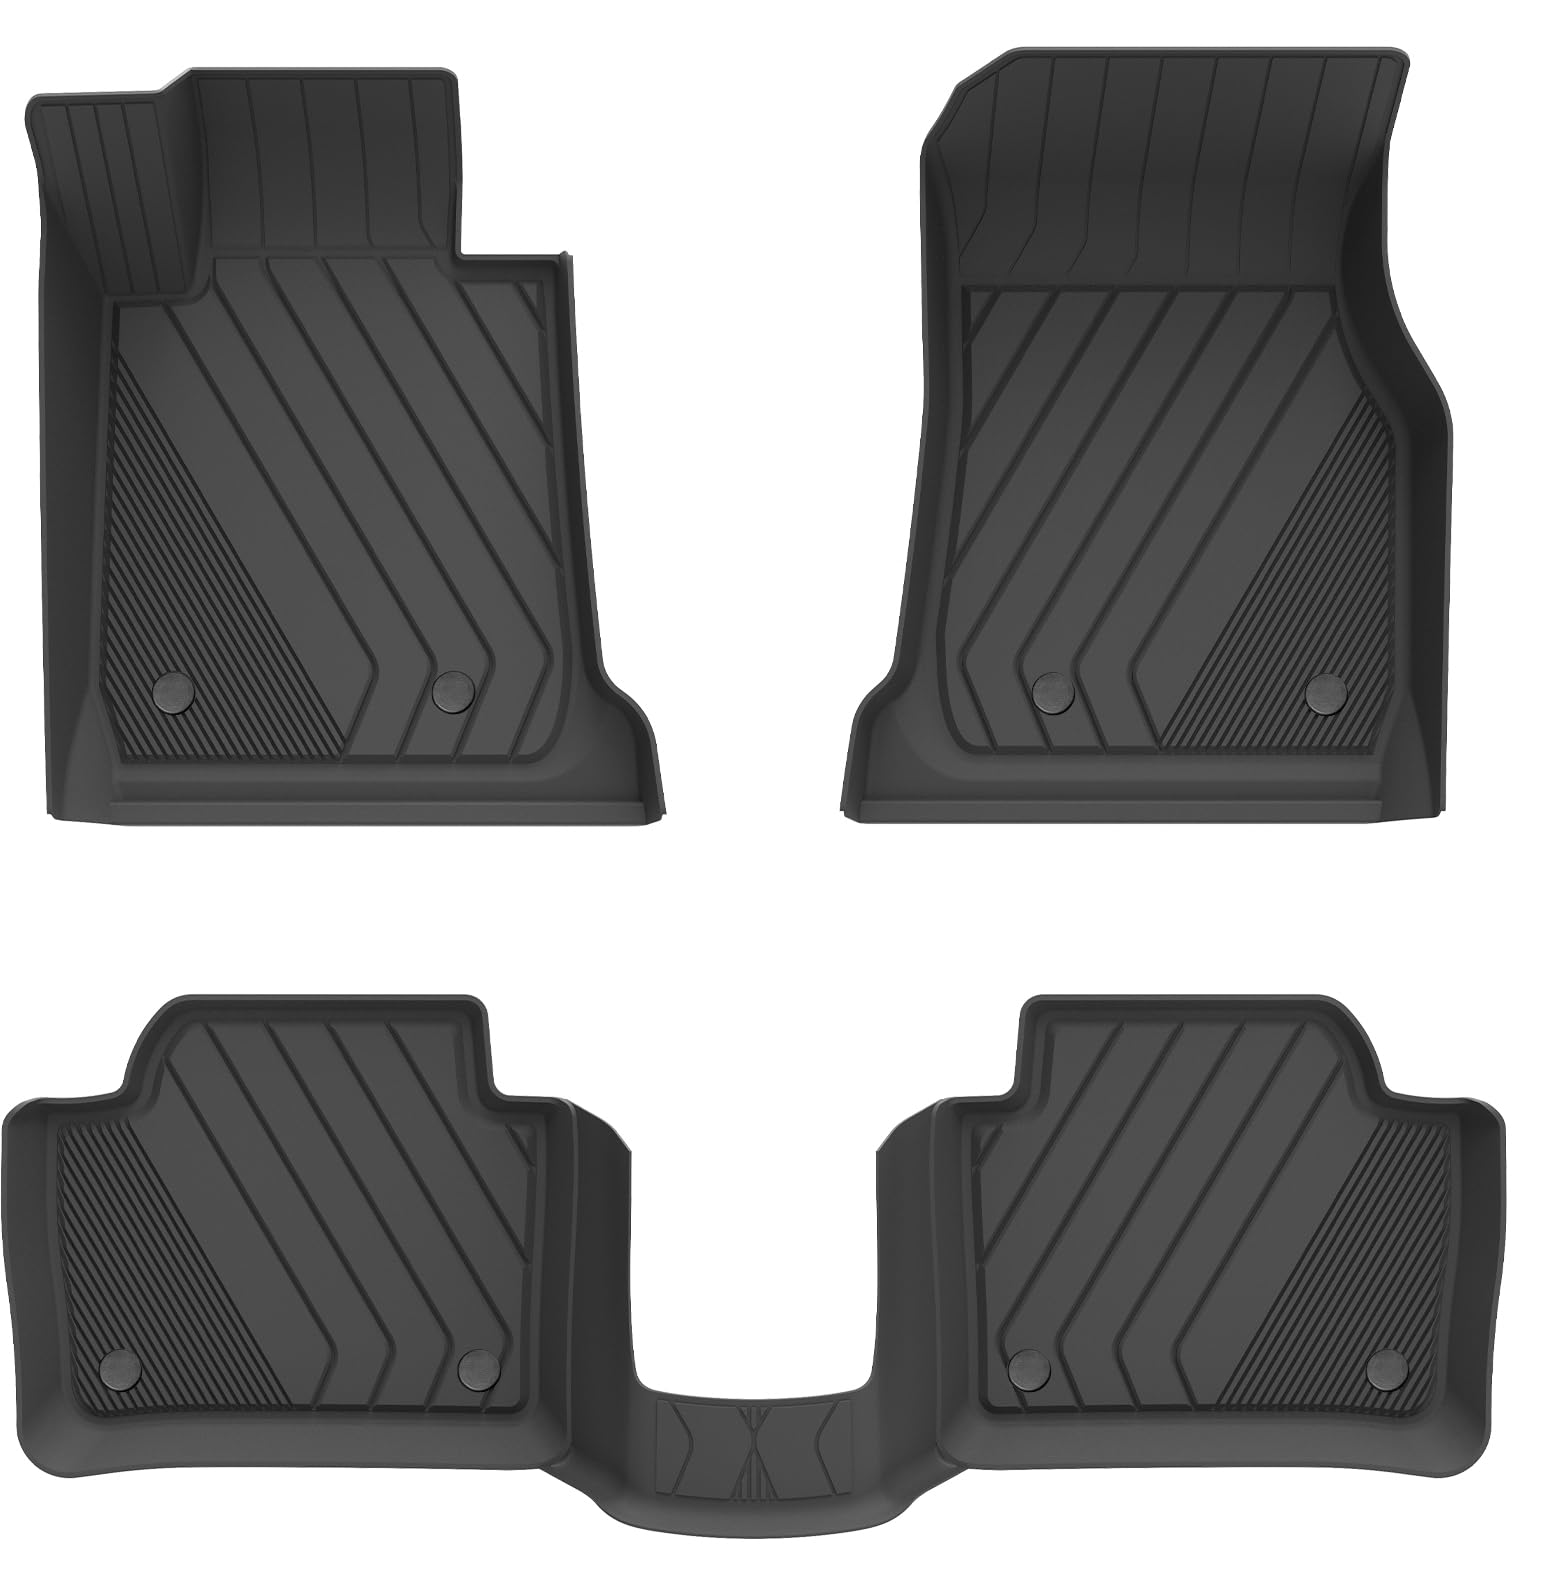 3W BMW 3 Series 2013-2018 (NOT for GT & X-Drive) Custom Floor Mats TPE Material & All-Weather Protection Vehicles & Parts 3Wliners 2013-2018 3 Series  2013-2018 1st&2nd Row Mats